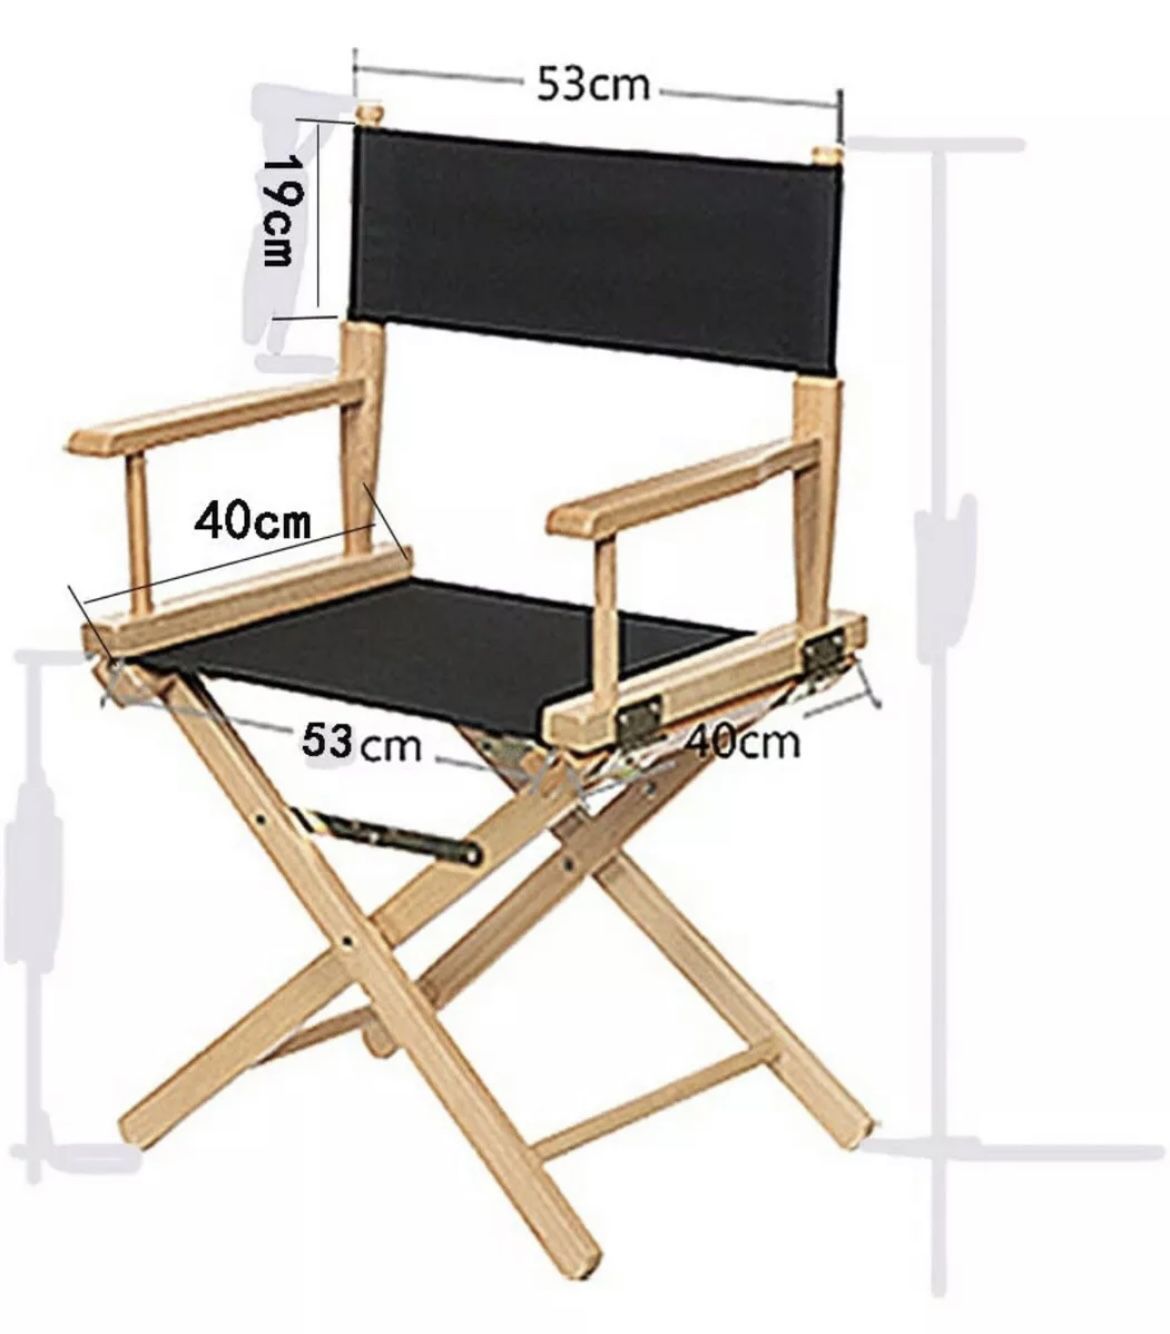 Upone Directors Chair Canvas Replacement Cover Kit